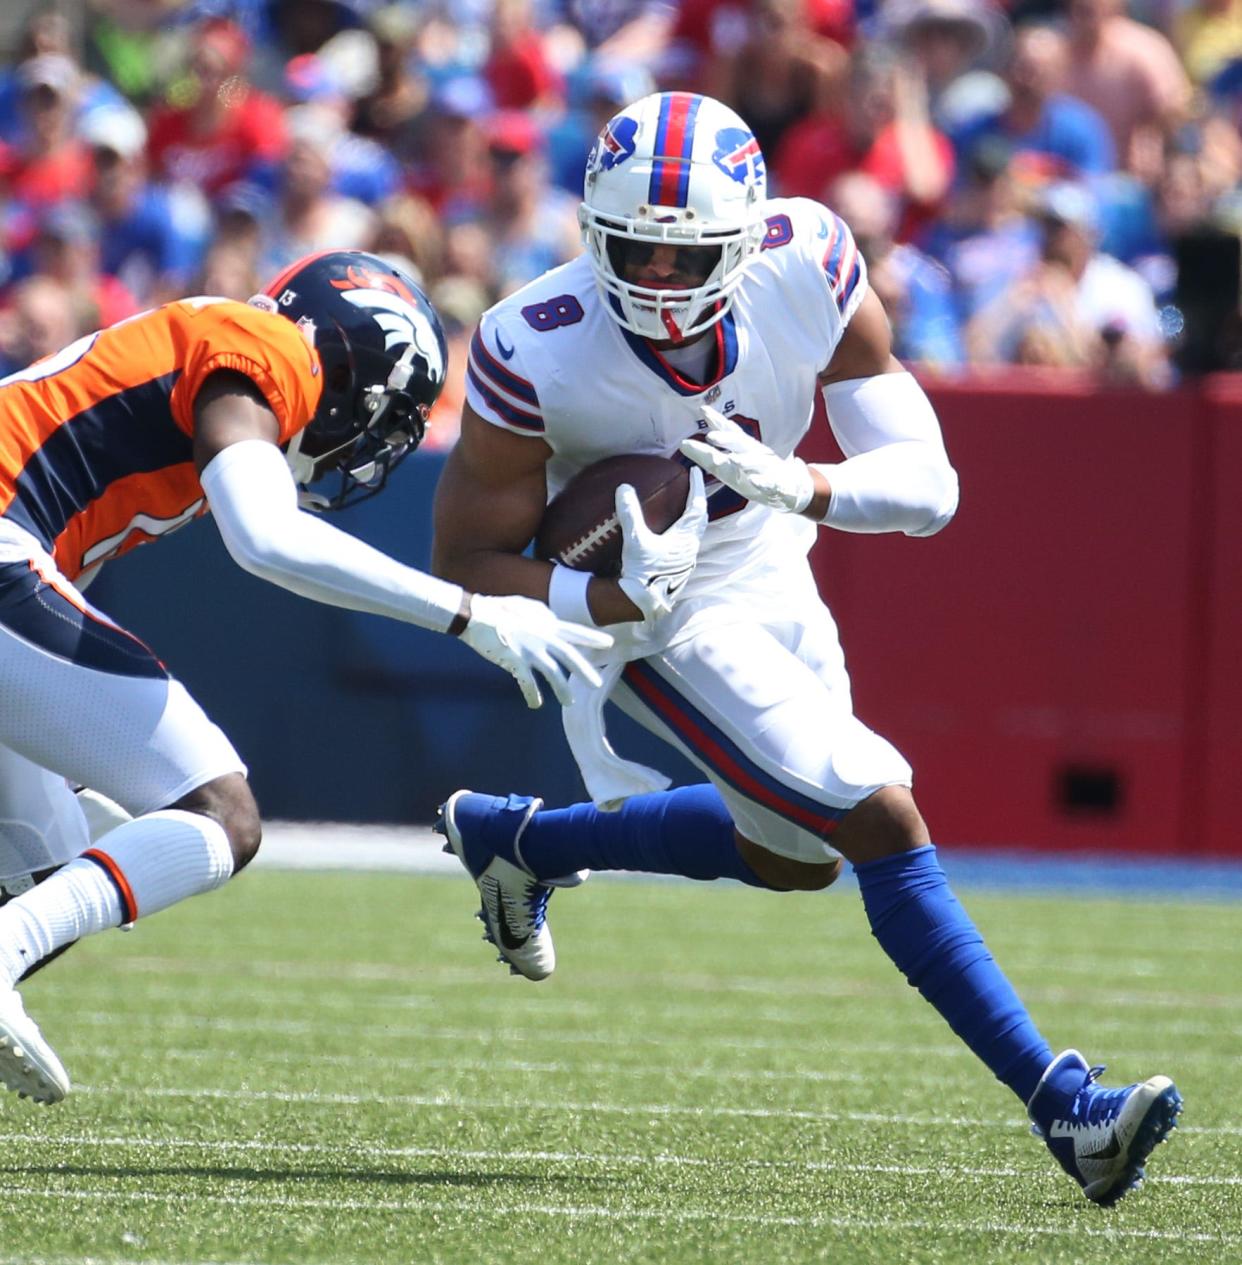 Bills tight end O.J. Howard runs for yards after the catch during the Bills preseason game against Denver Saturday, Aug. 20, 2022 at Highmark Stadium.  Buffalo won the game 42-15.